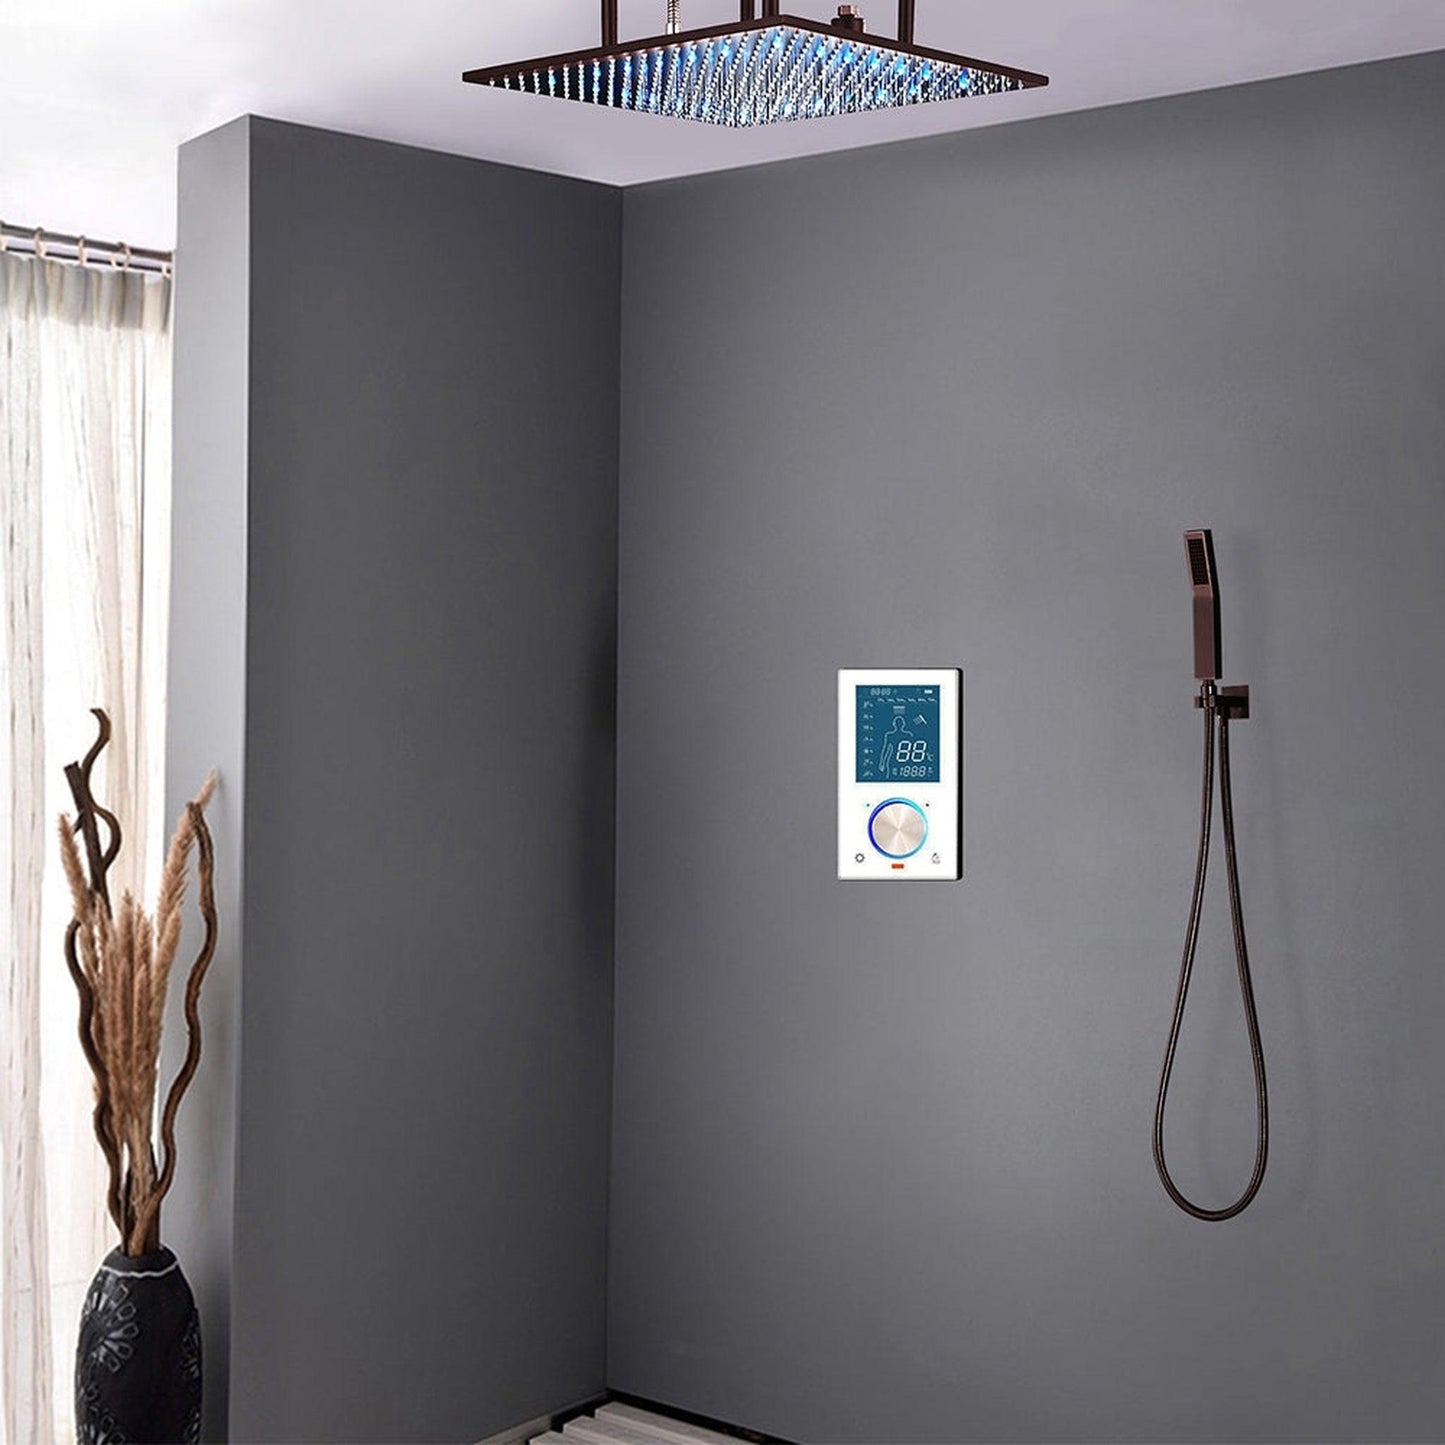 Fontana Creative Luxury Light Oil Rubbed Bronze Rectangular Ceiling Mounted Smart LED Widespread Shower Head Rainfall & Mist Shower System With 3-Way Digital Controller and Hand Shower